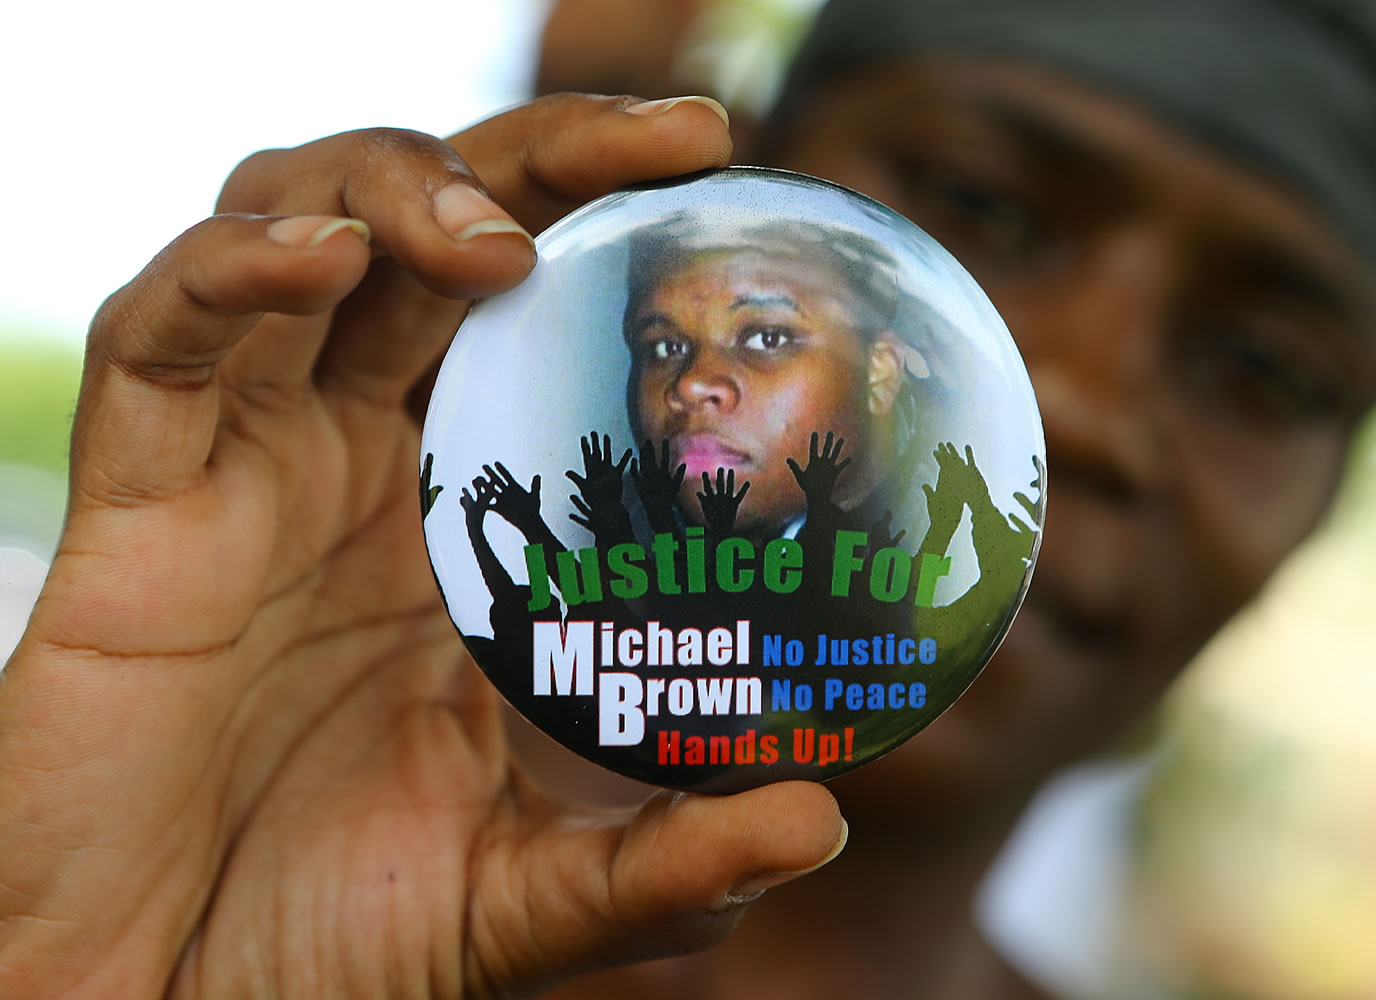 Curtis Compton/Atlanta Journal Constitution
Nikki Jones, of Spanish Lake, Mo, holds a button in support of Michael Brown while visiting where he was fatally shot by police in Ferguson.